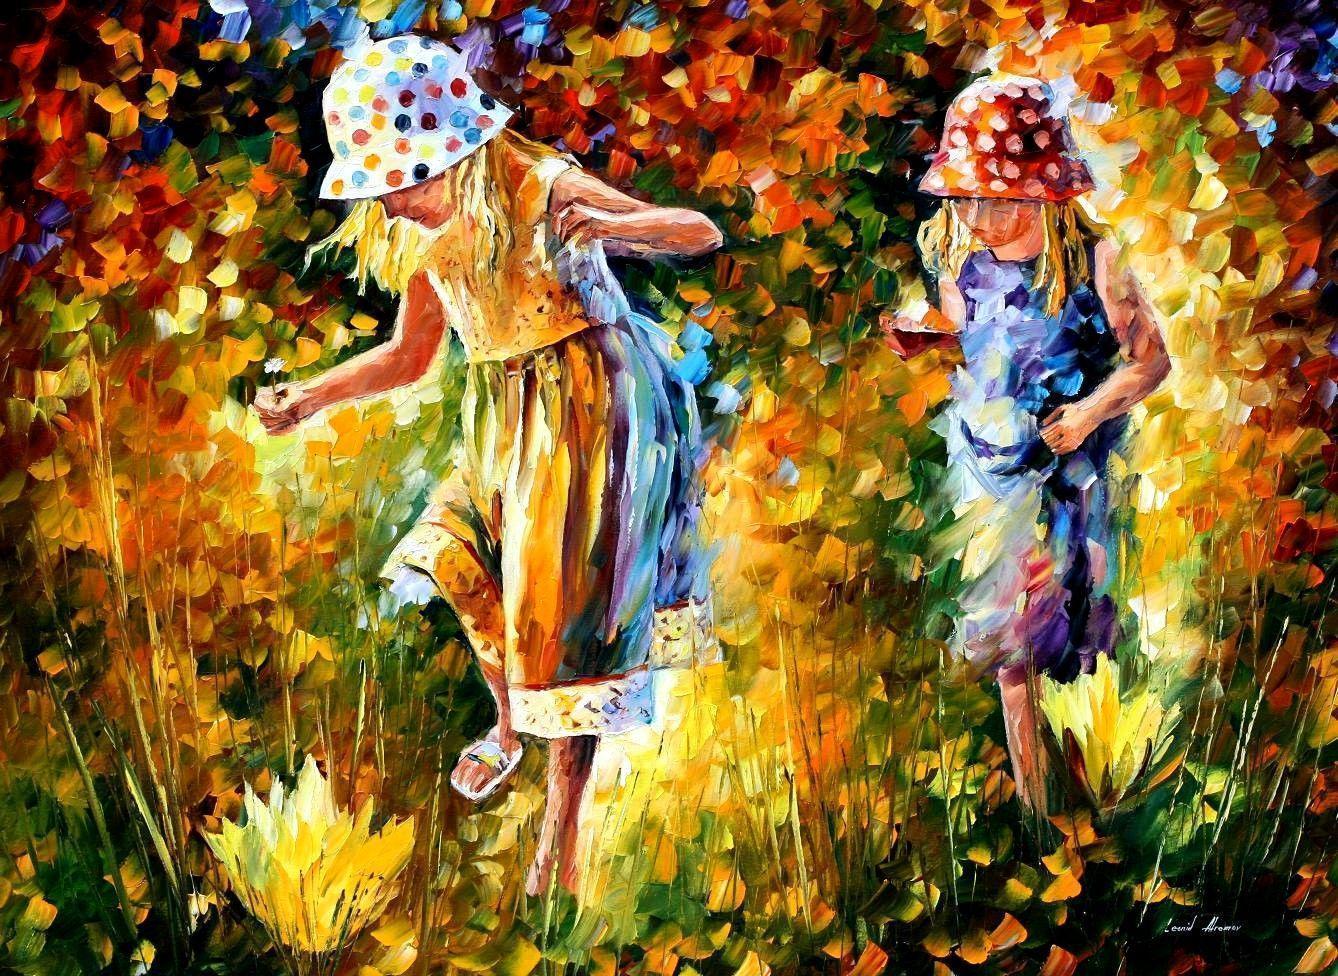 Two sisters, by Leonid Afremov, Desktop and mobile wallpaper